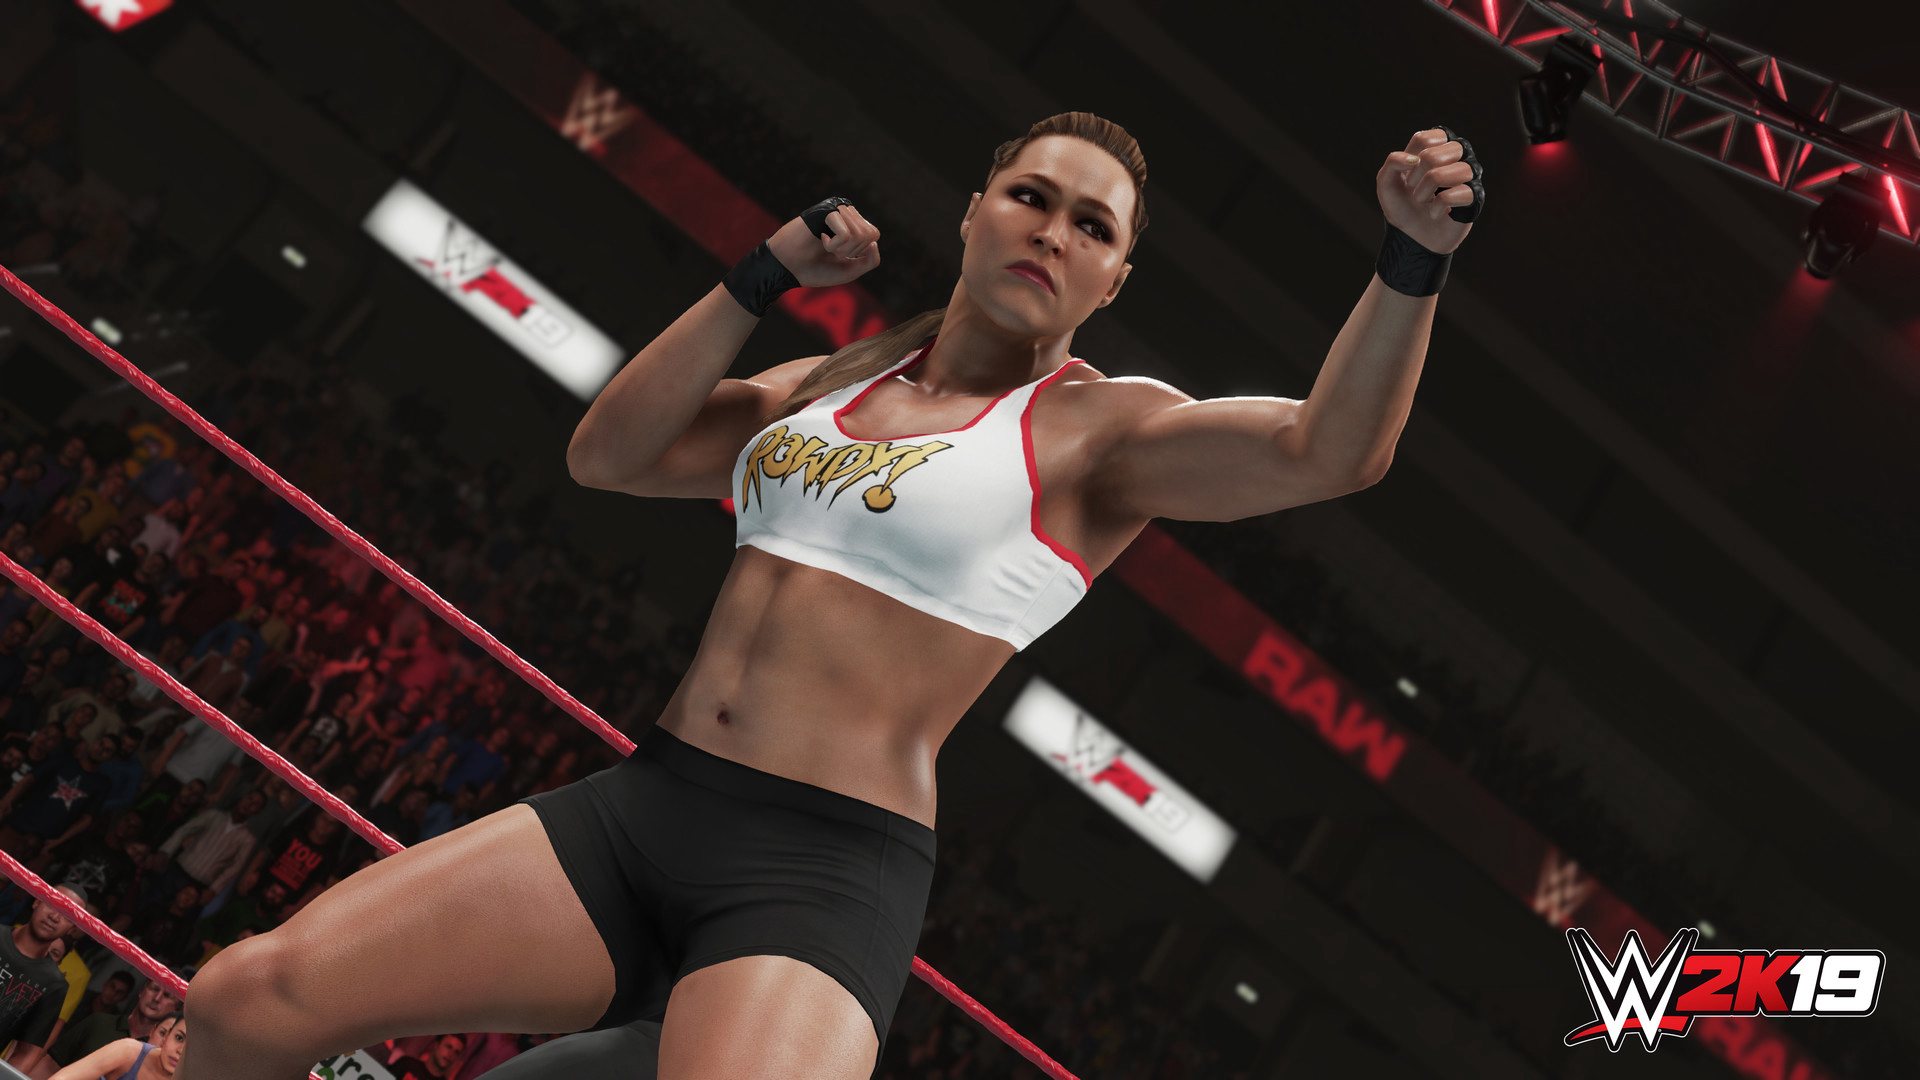 WWE 2K19 PlayStation 4 Account pixelpuffin.net Activation Link 15.81 $